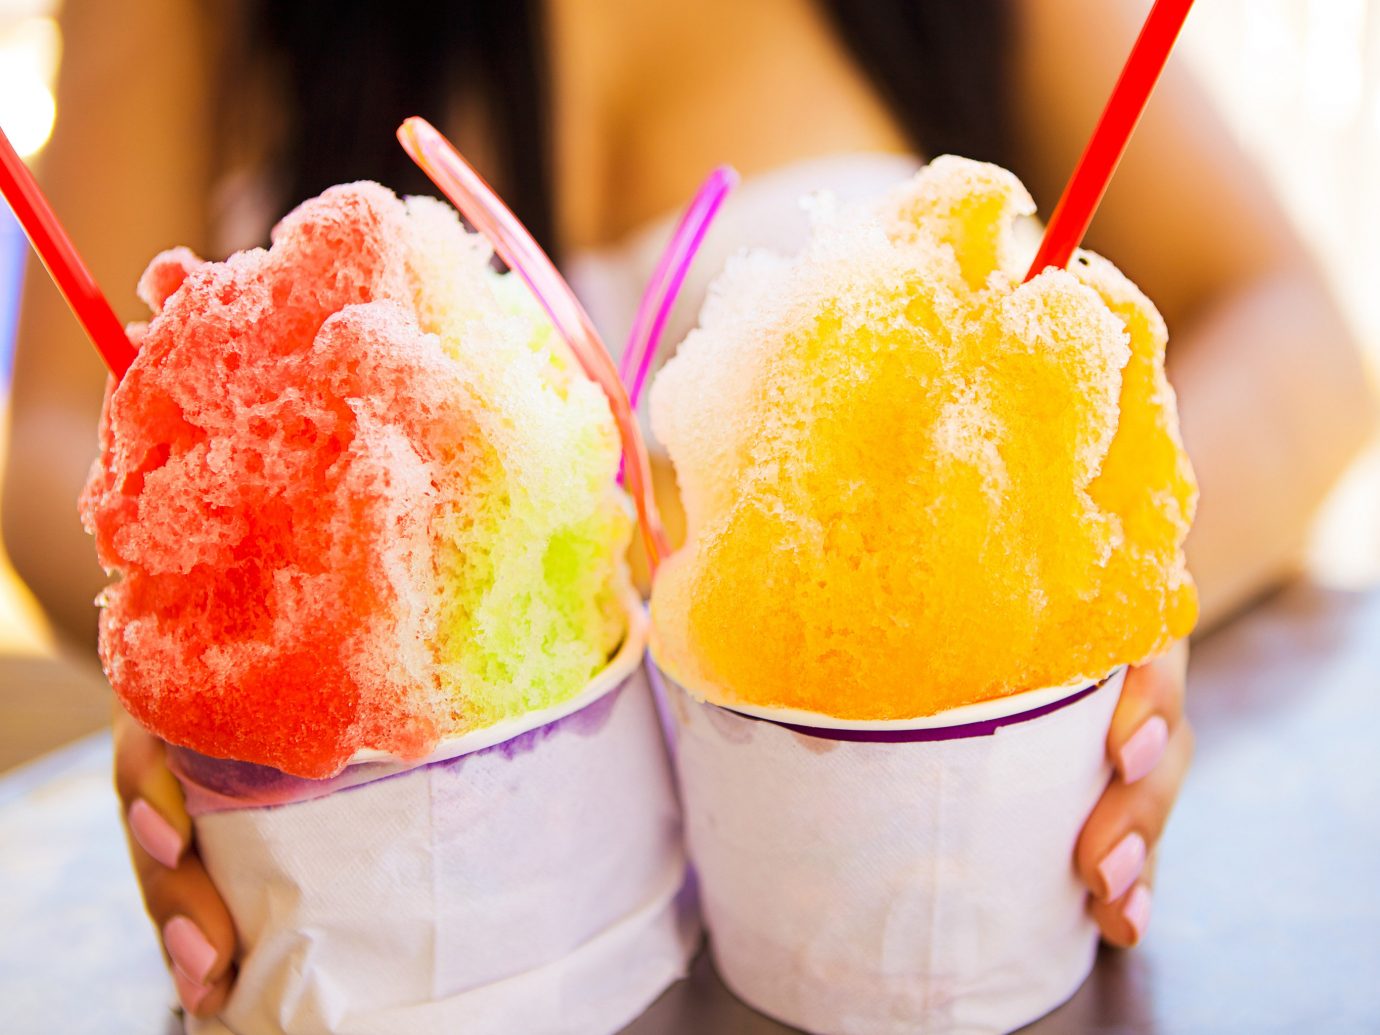 Sno cones from a shop in Honolulu, Hawaii